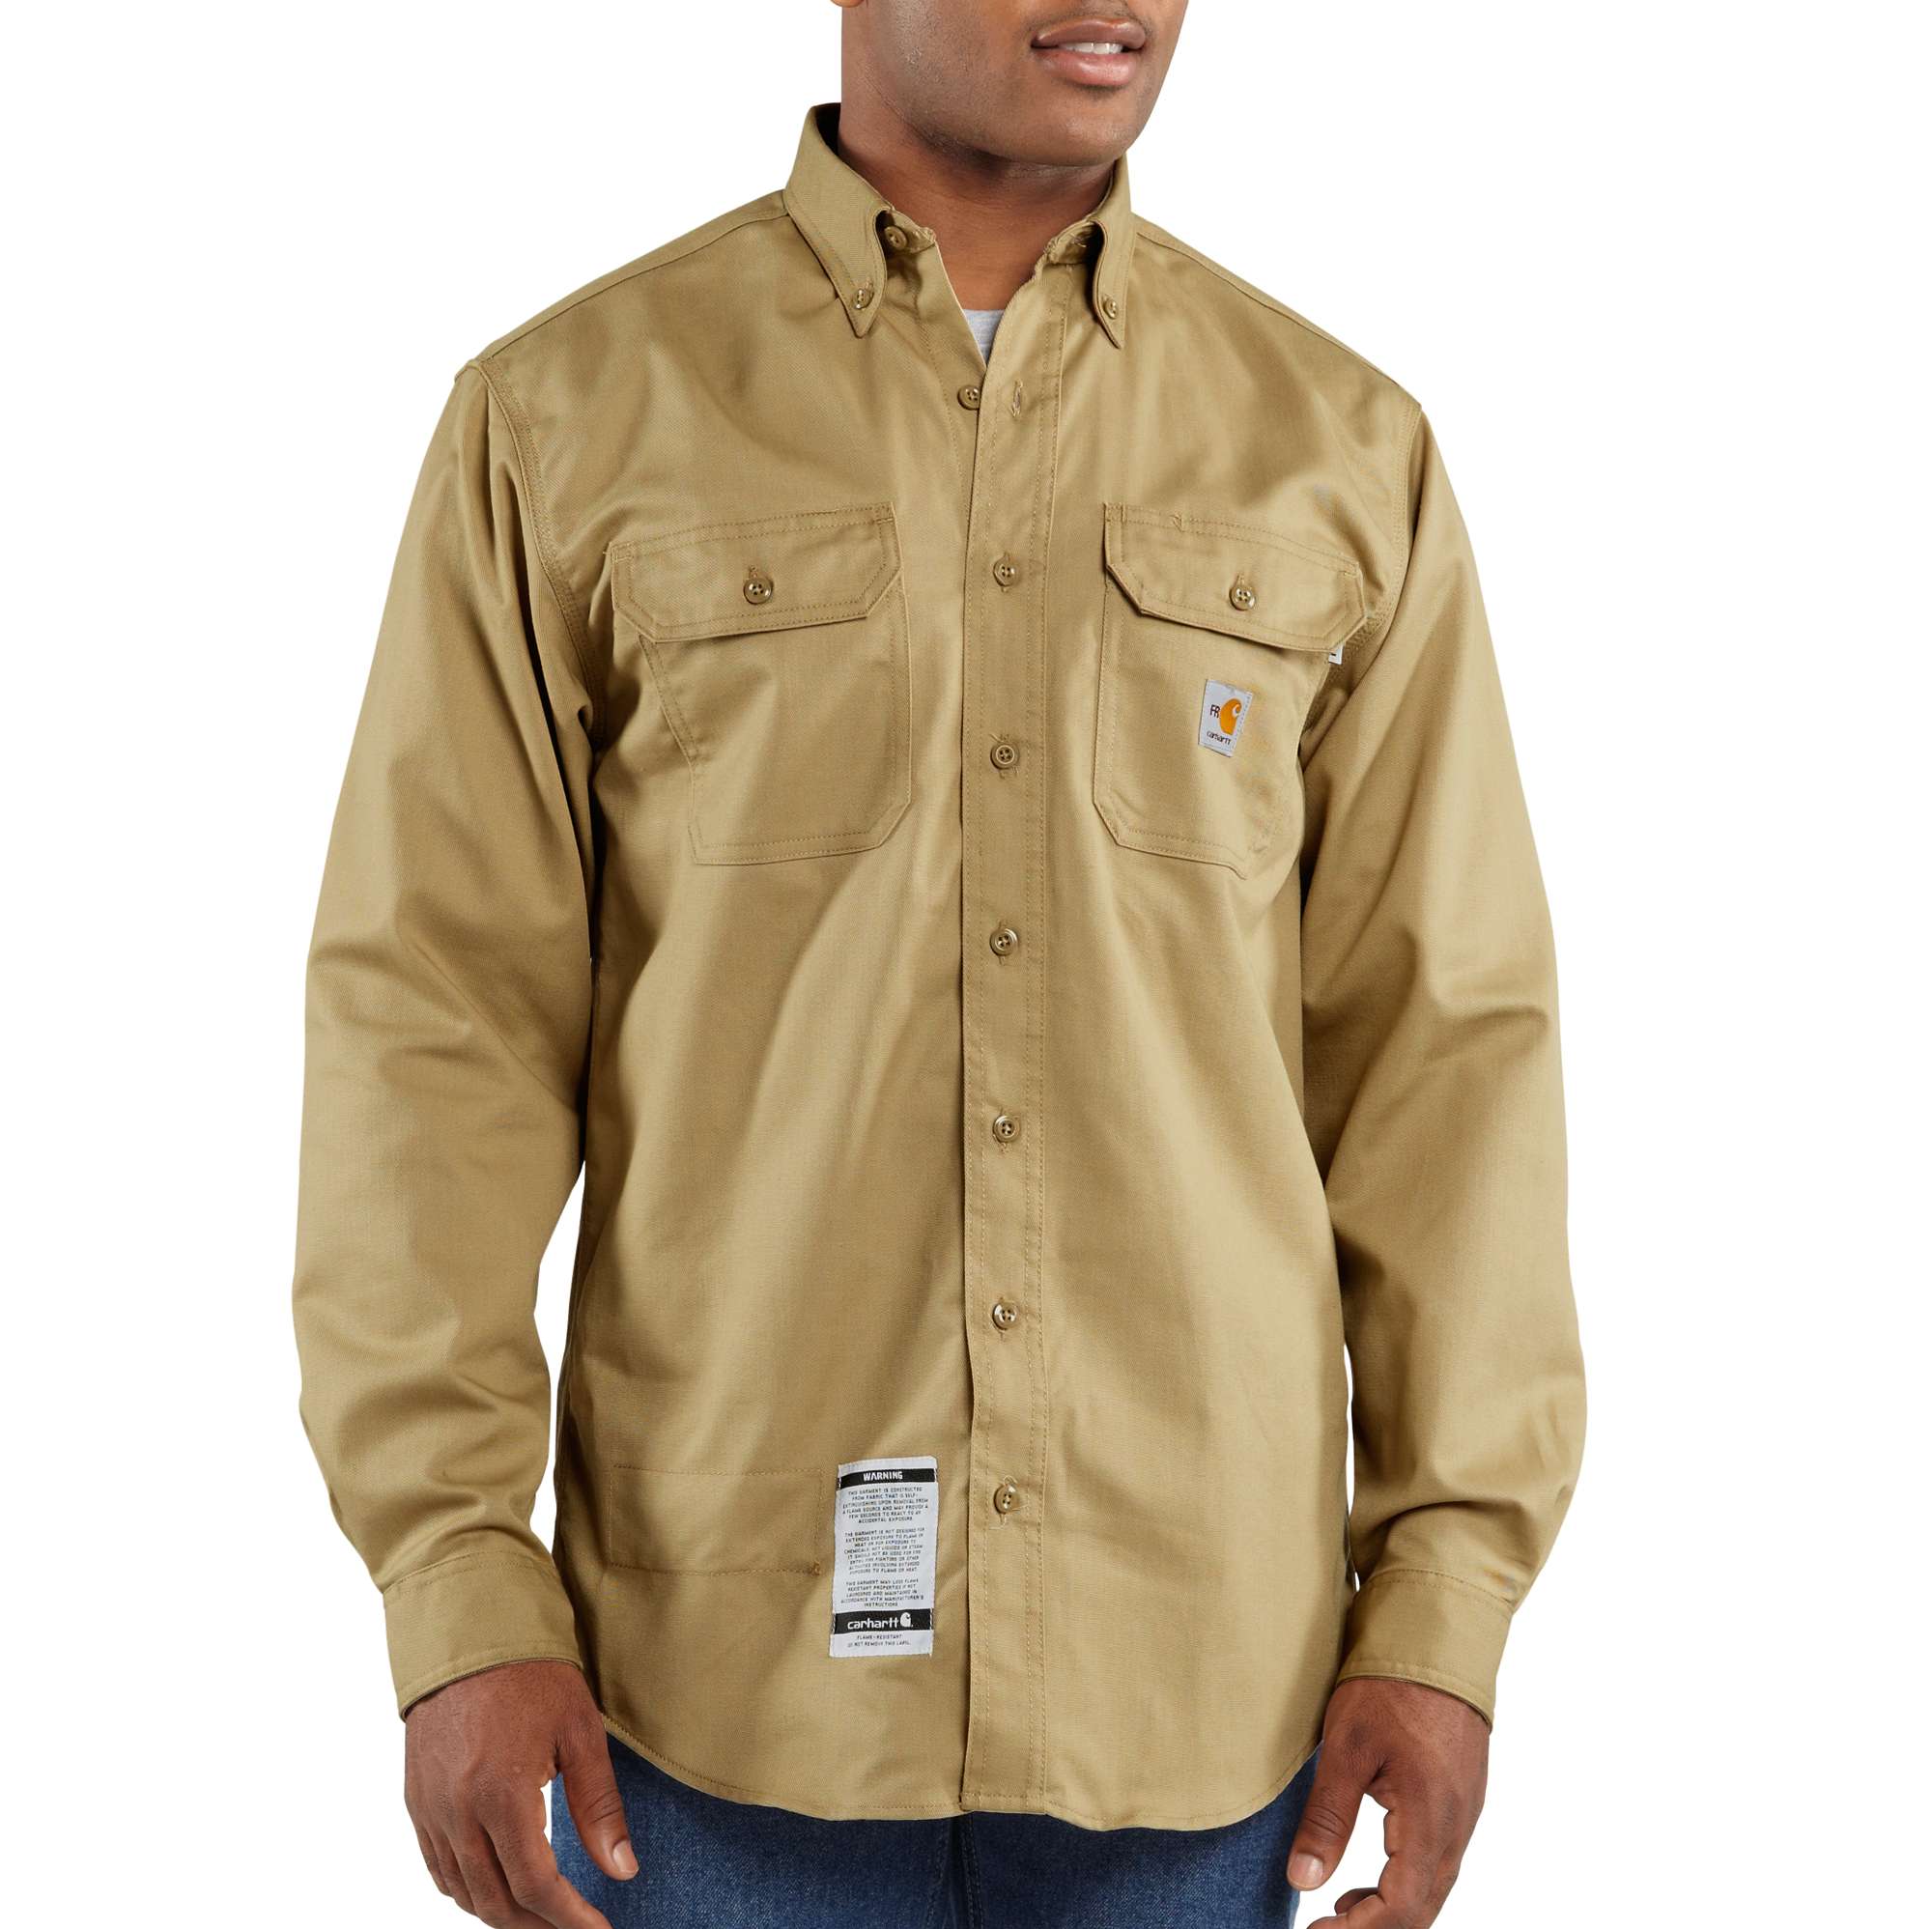 Men’s  Flame-Resistant Twill Shirt with Pocket Flap